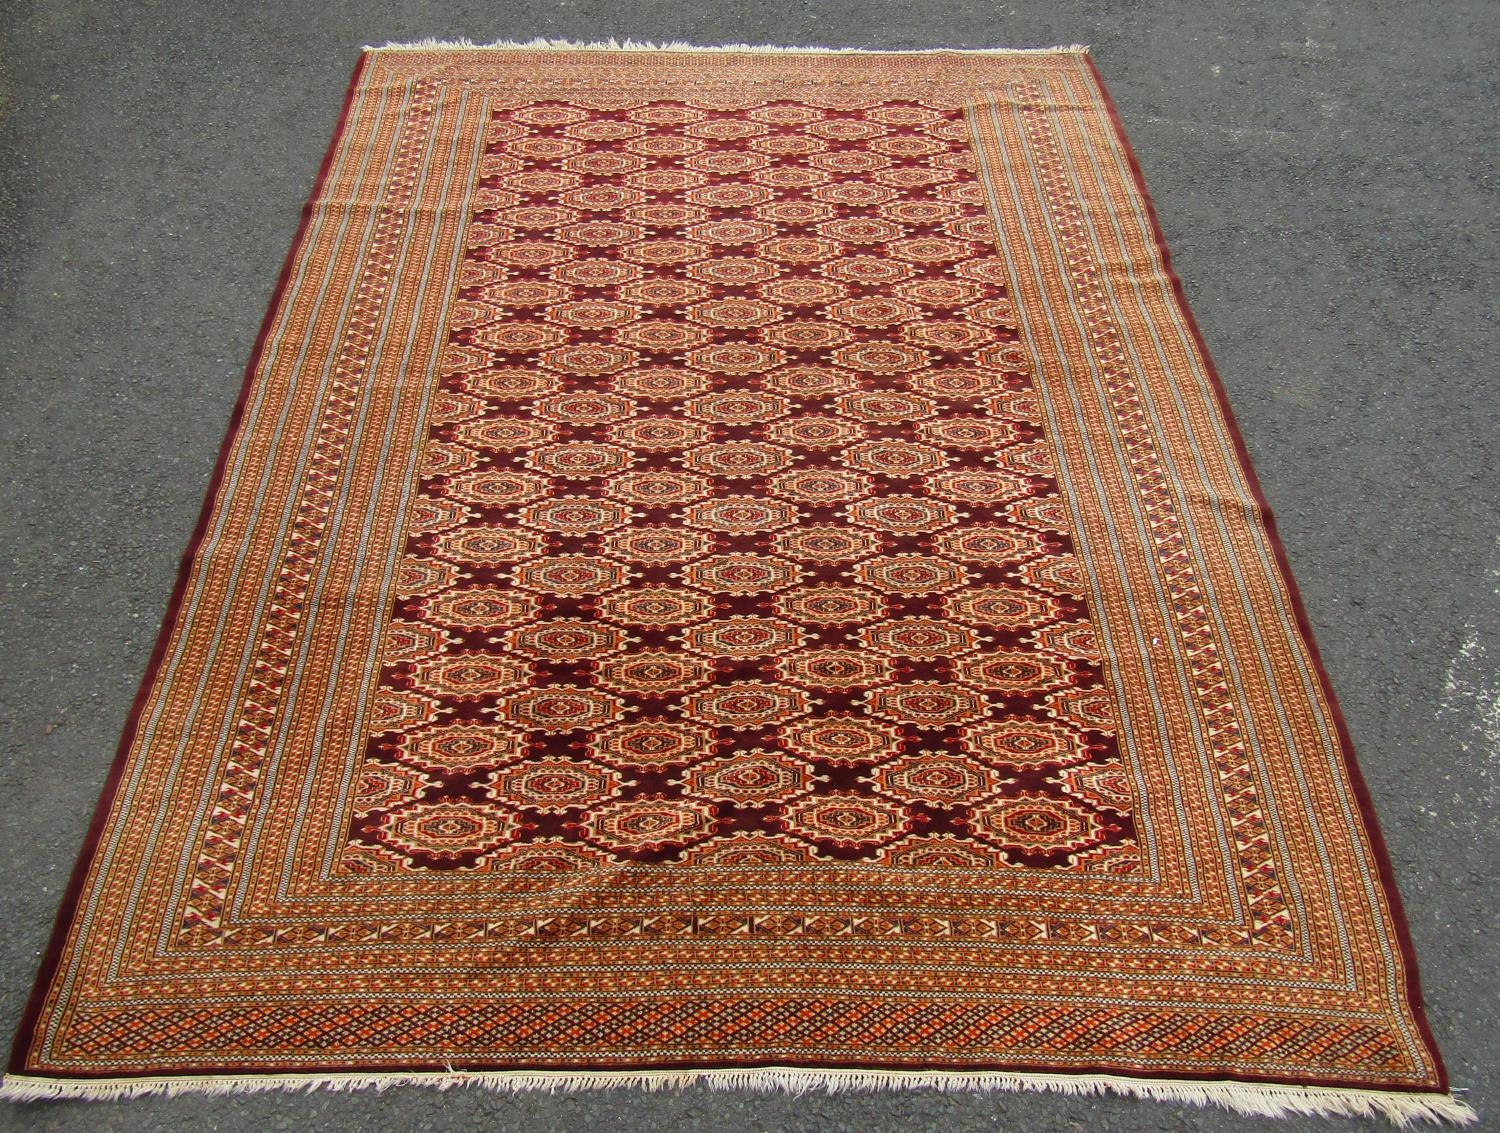 A large Turkoman carpet with a field of brown interspersed with many elephant foot guls, 310cm x